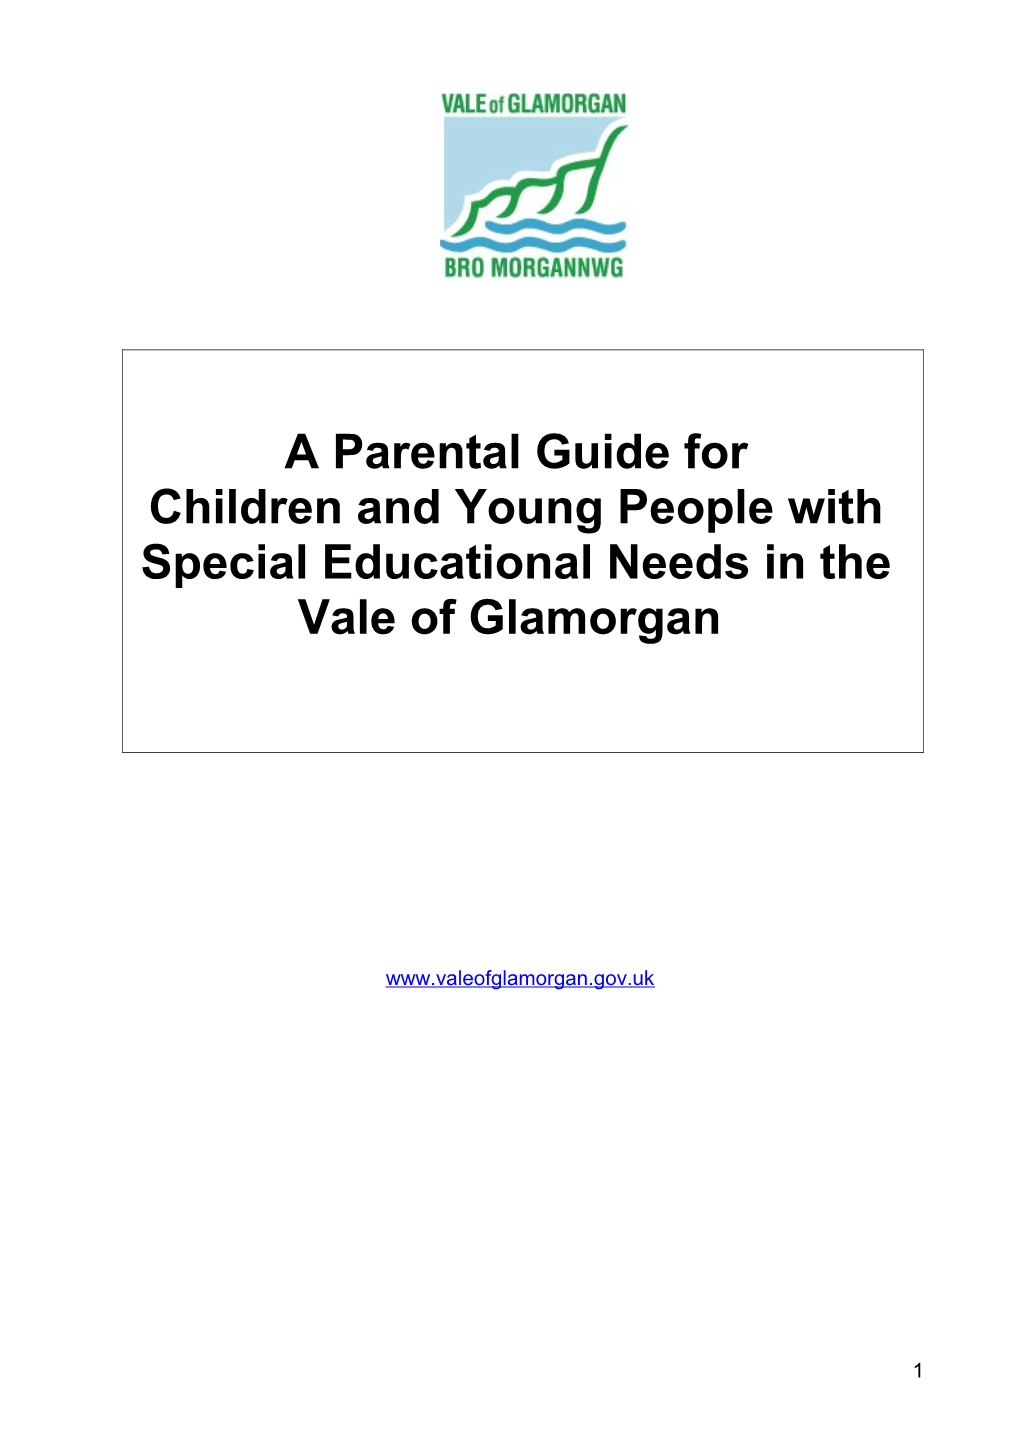 A-Parental-Guide-For-Children-And-Young-People-With-Special-Educational-Needs